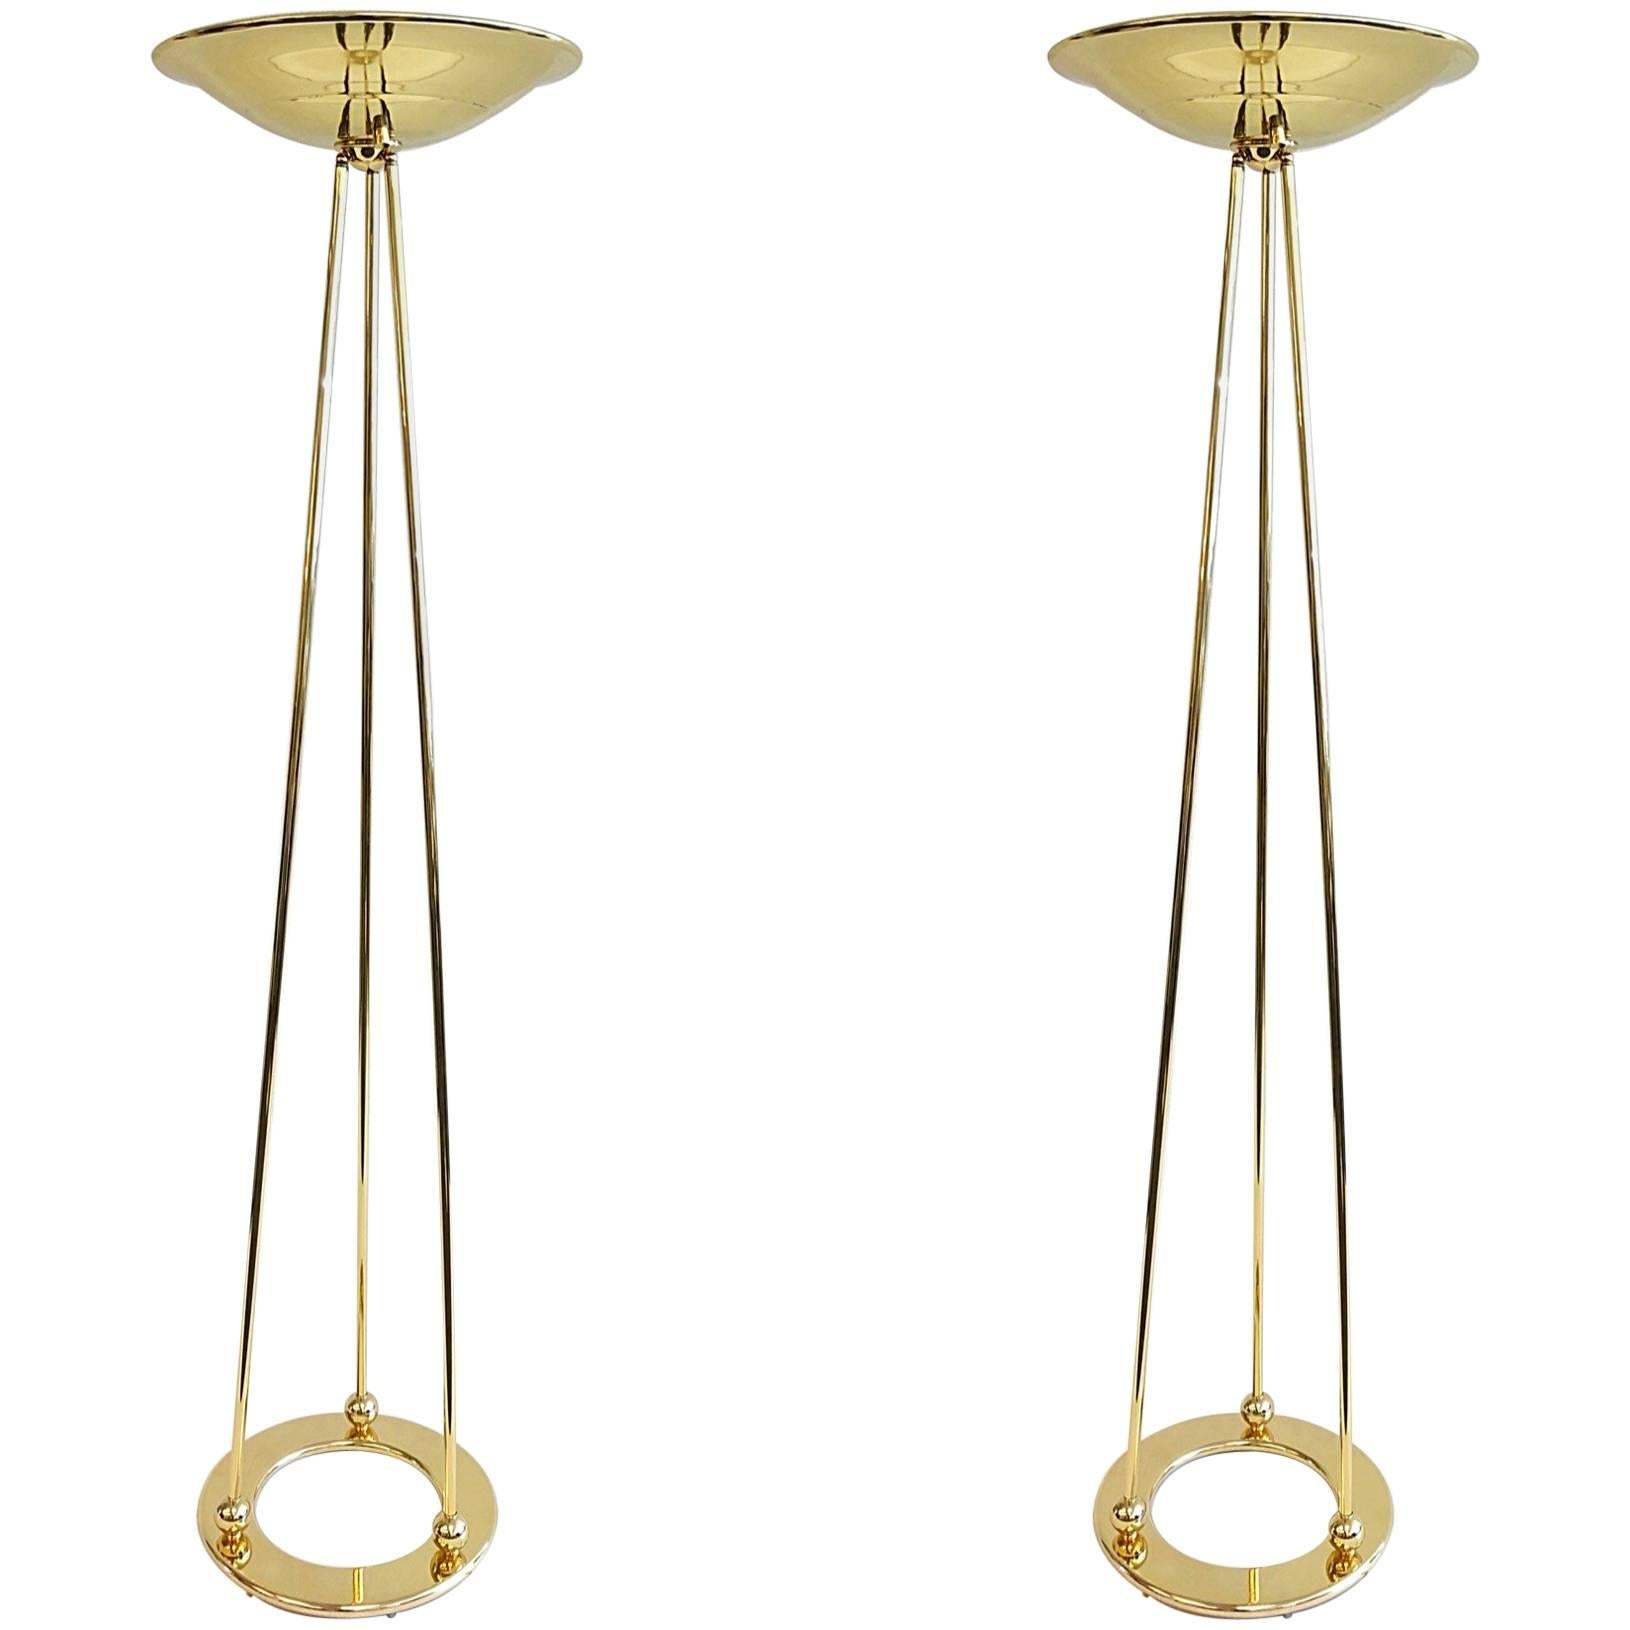 Pair of Polish Brass Torchiere Floor Lamps by Casella